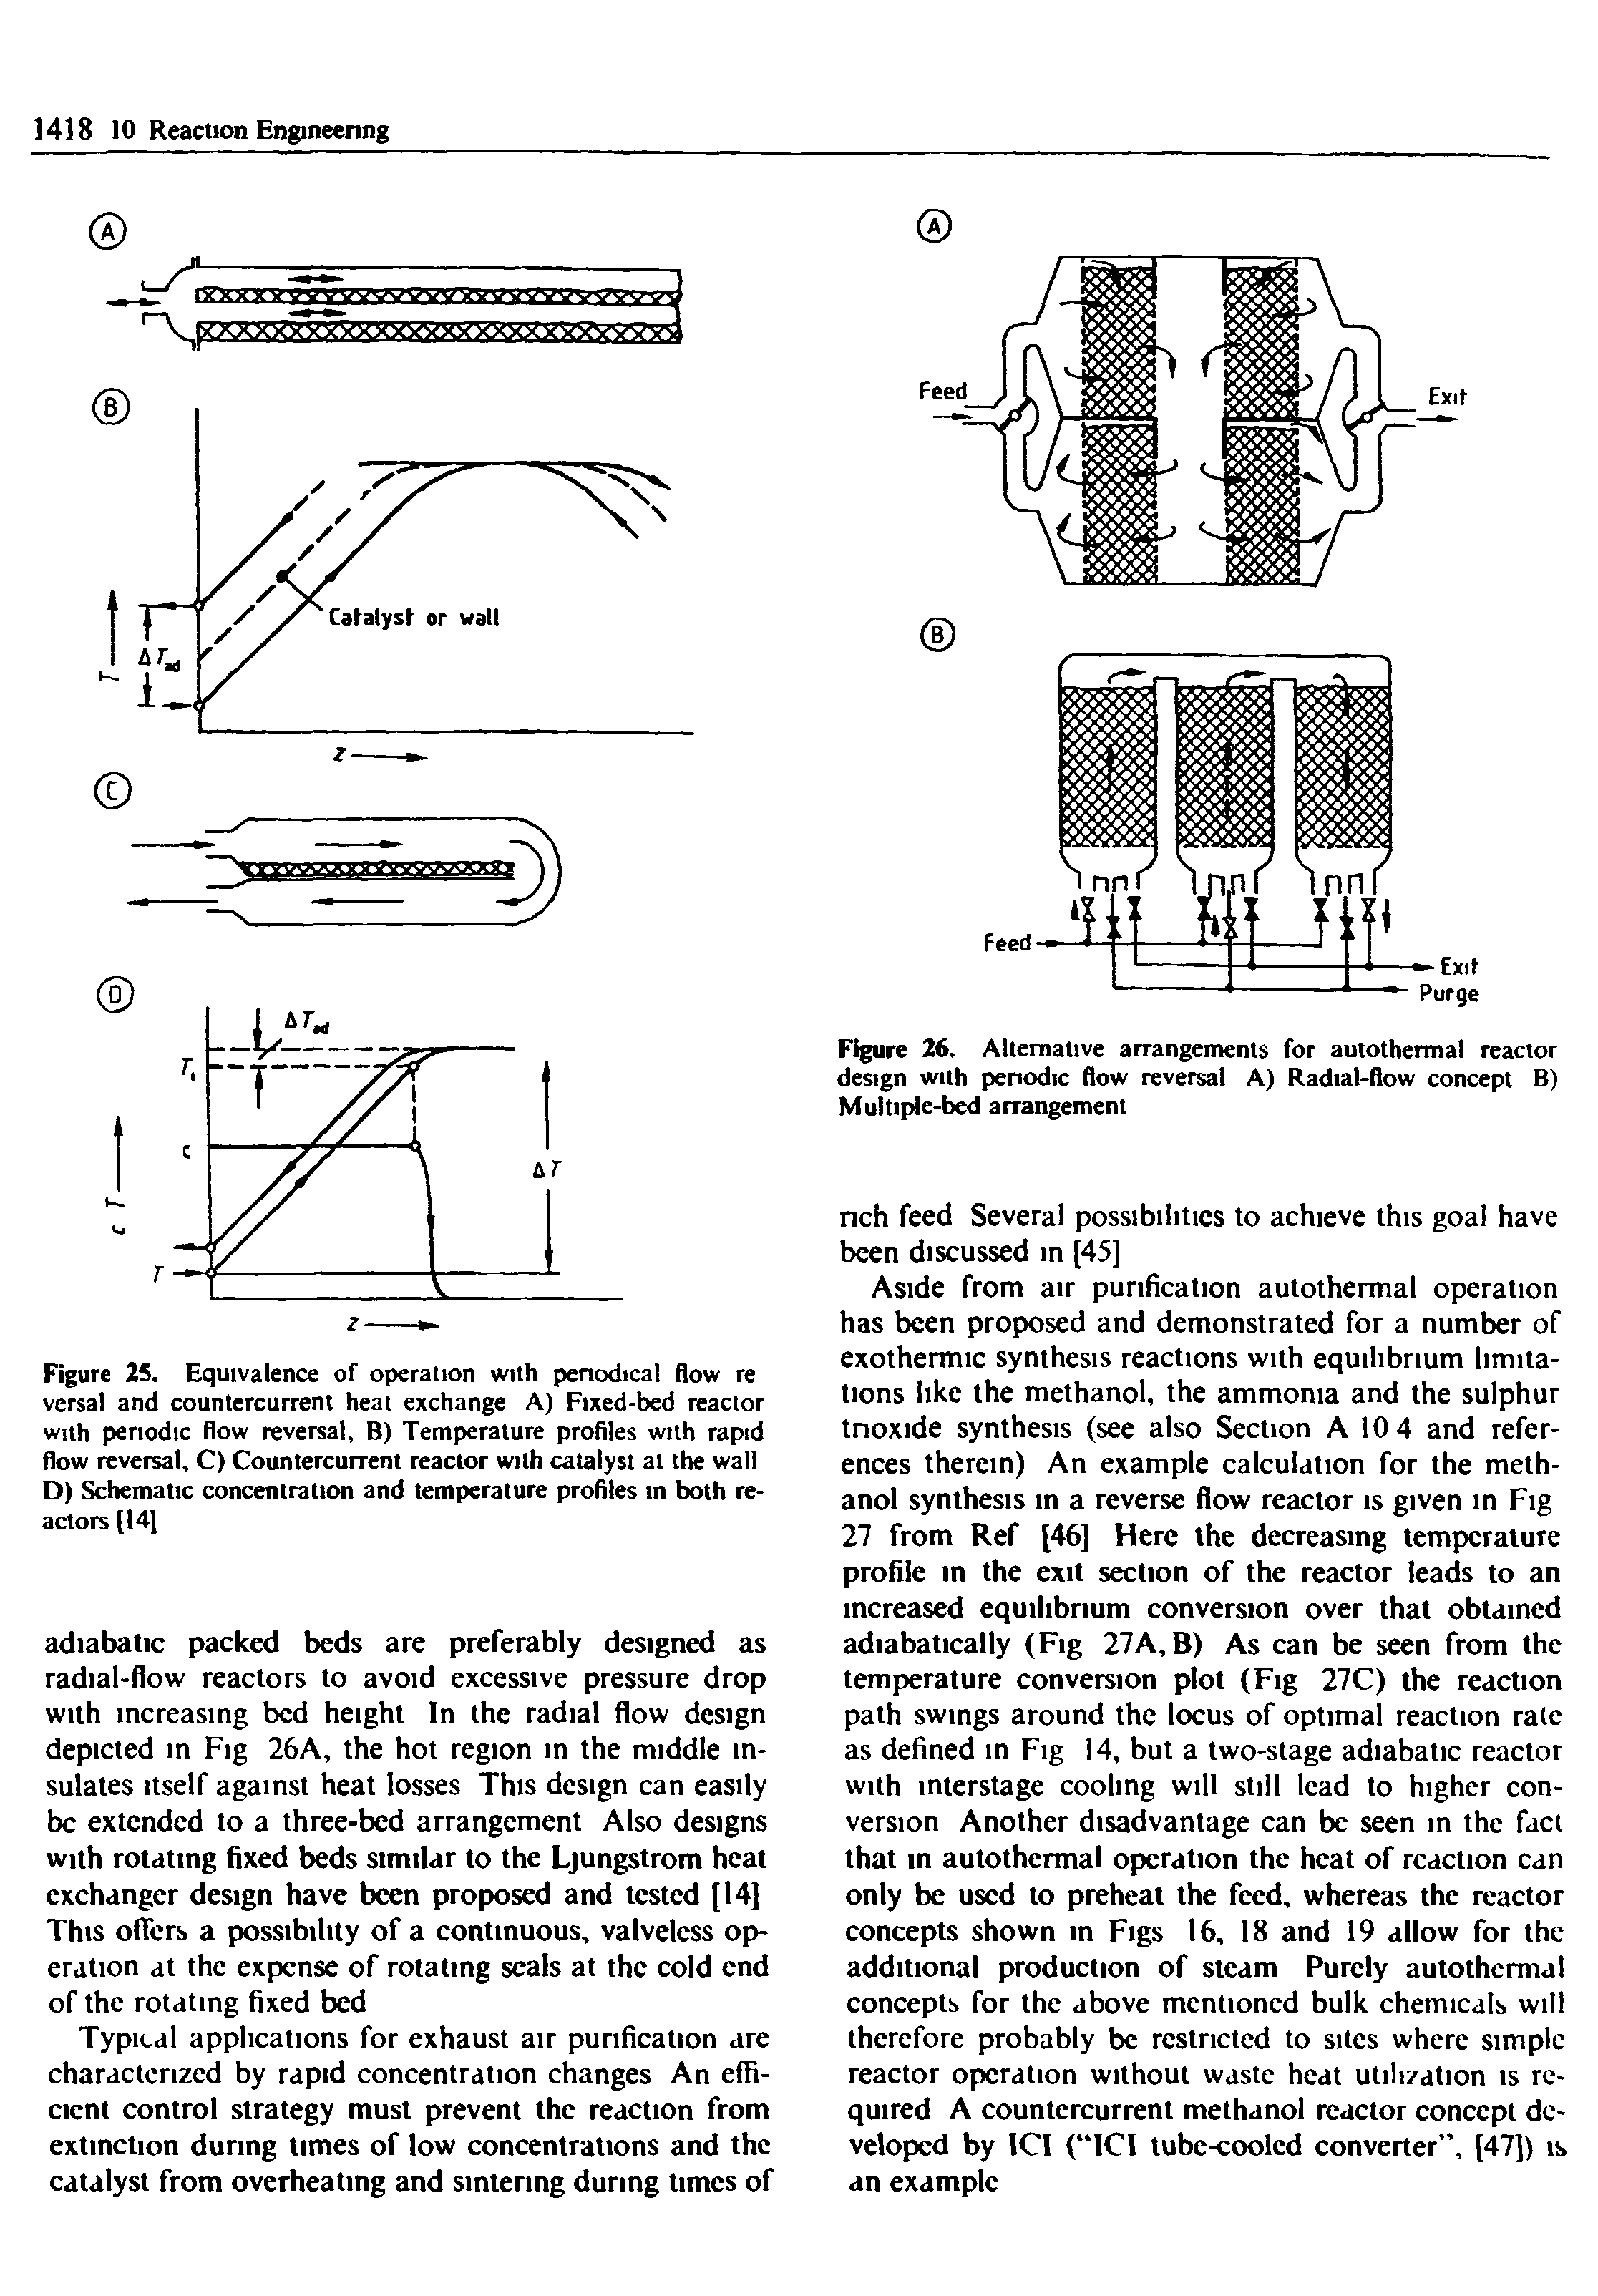 Figure 25. Equivalence of operation with periodical flow re versa and countercurrent heat exchange A) Fixed-bed reactor with periodic flow reversal, B) Temperature profiles with rapid flow reversal, C) Countercurrent reactor with catalyst at the wall D) Schematic concentration and temperature profiles m both reactors [141...